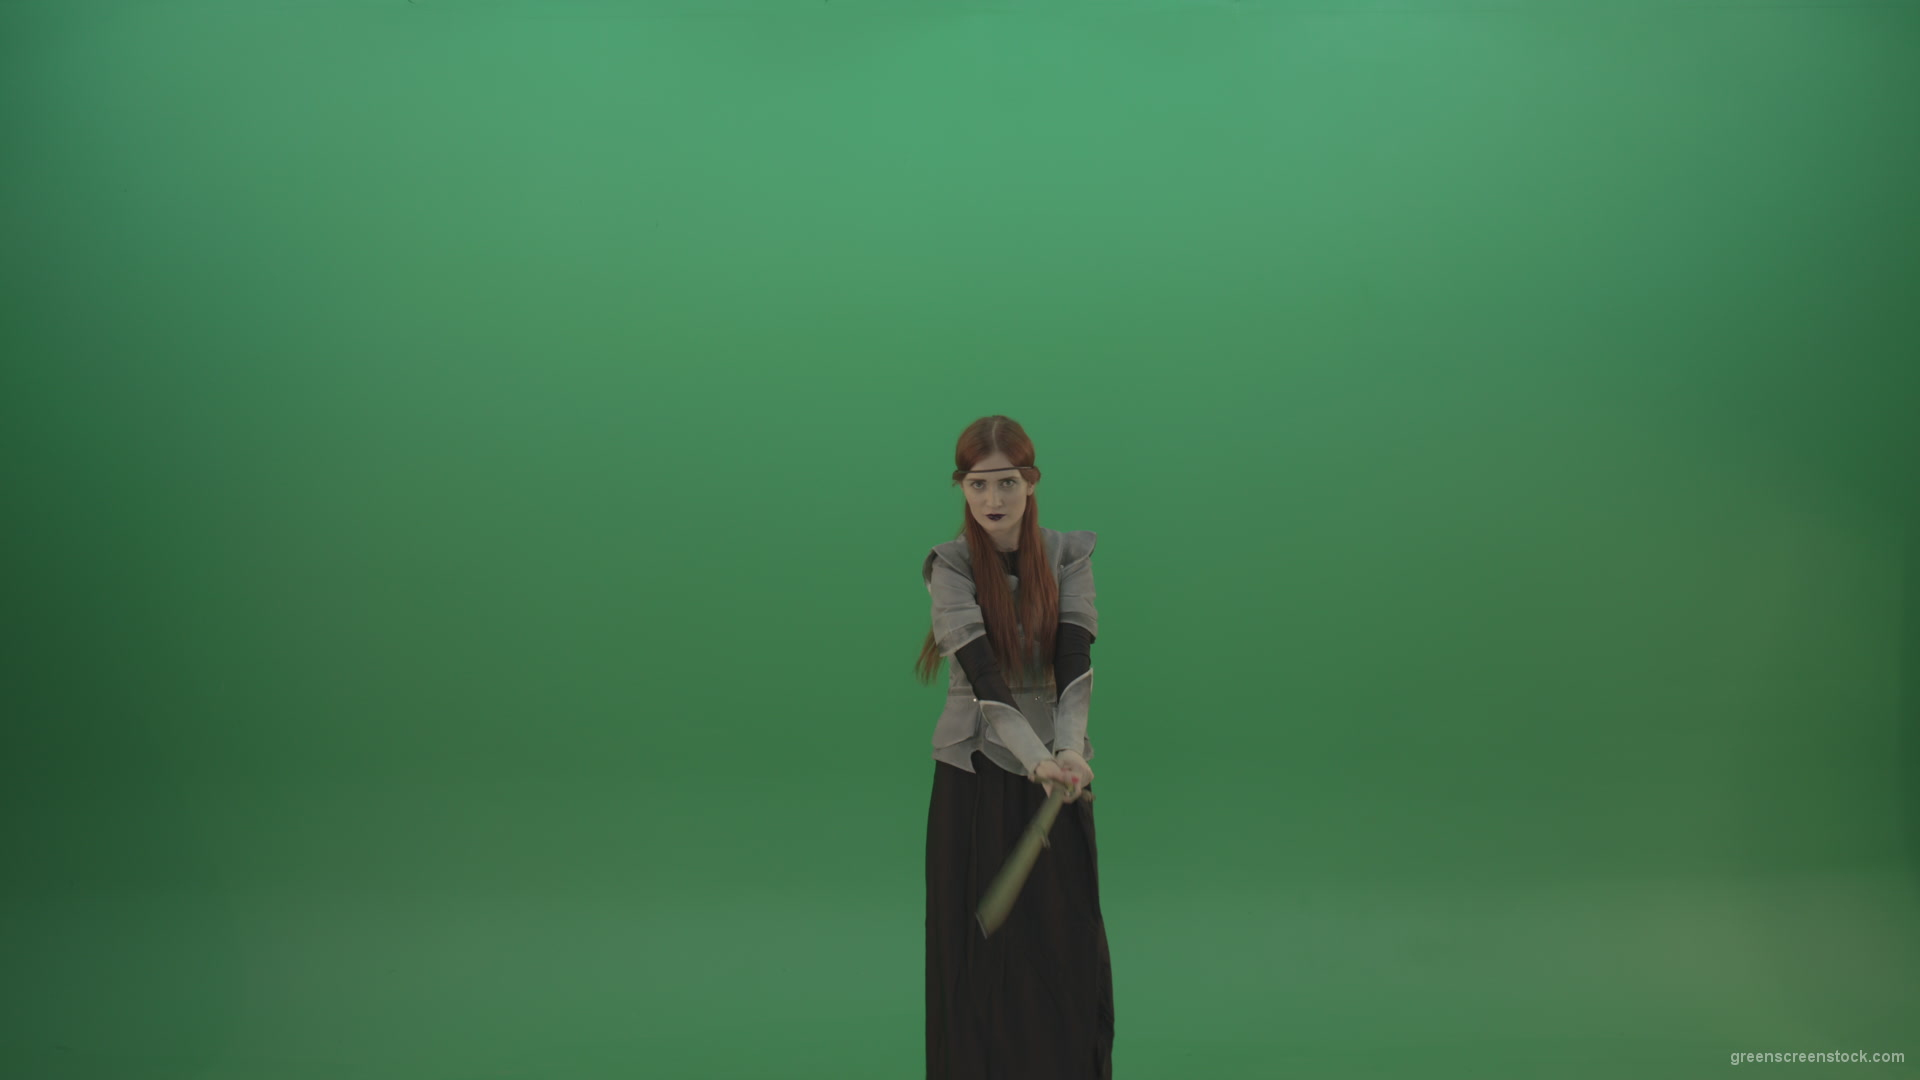 Fighting-girl-in-silver-armor-swinging-with-the-sword-aiming-at-one-goal-on-chromakey_005 Green Screen Stock